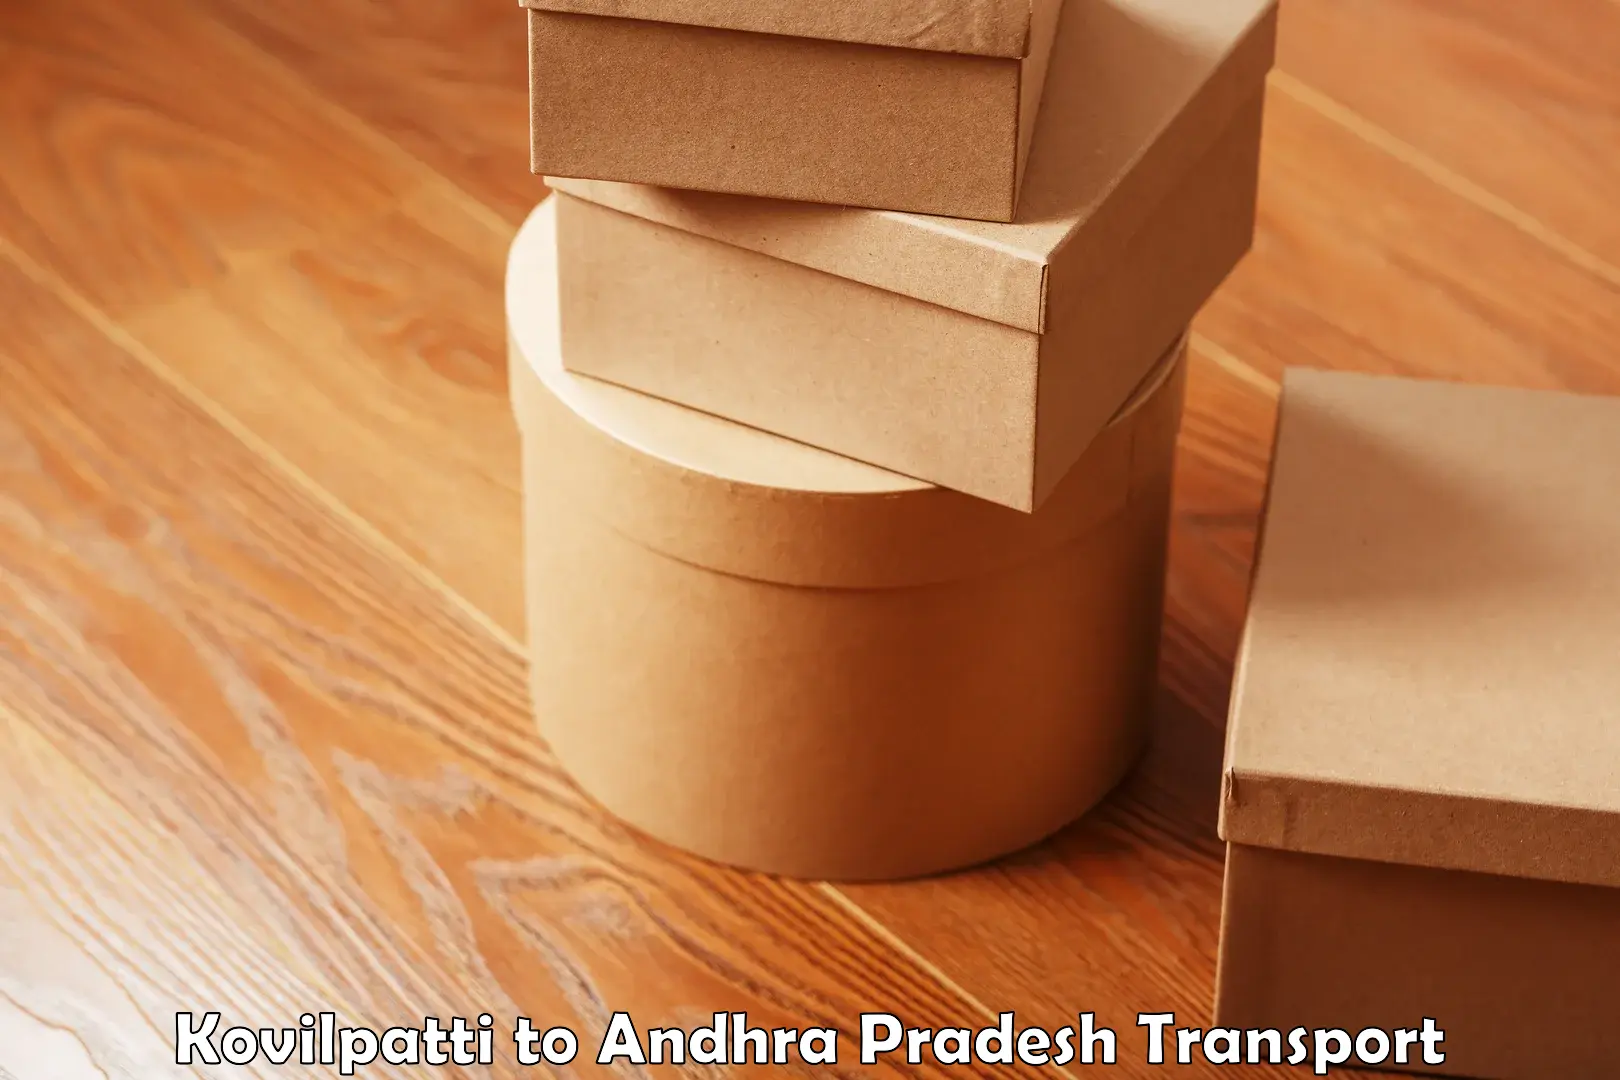 Air freight transport services in Kovilpatti to Chittoor